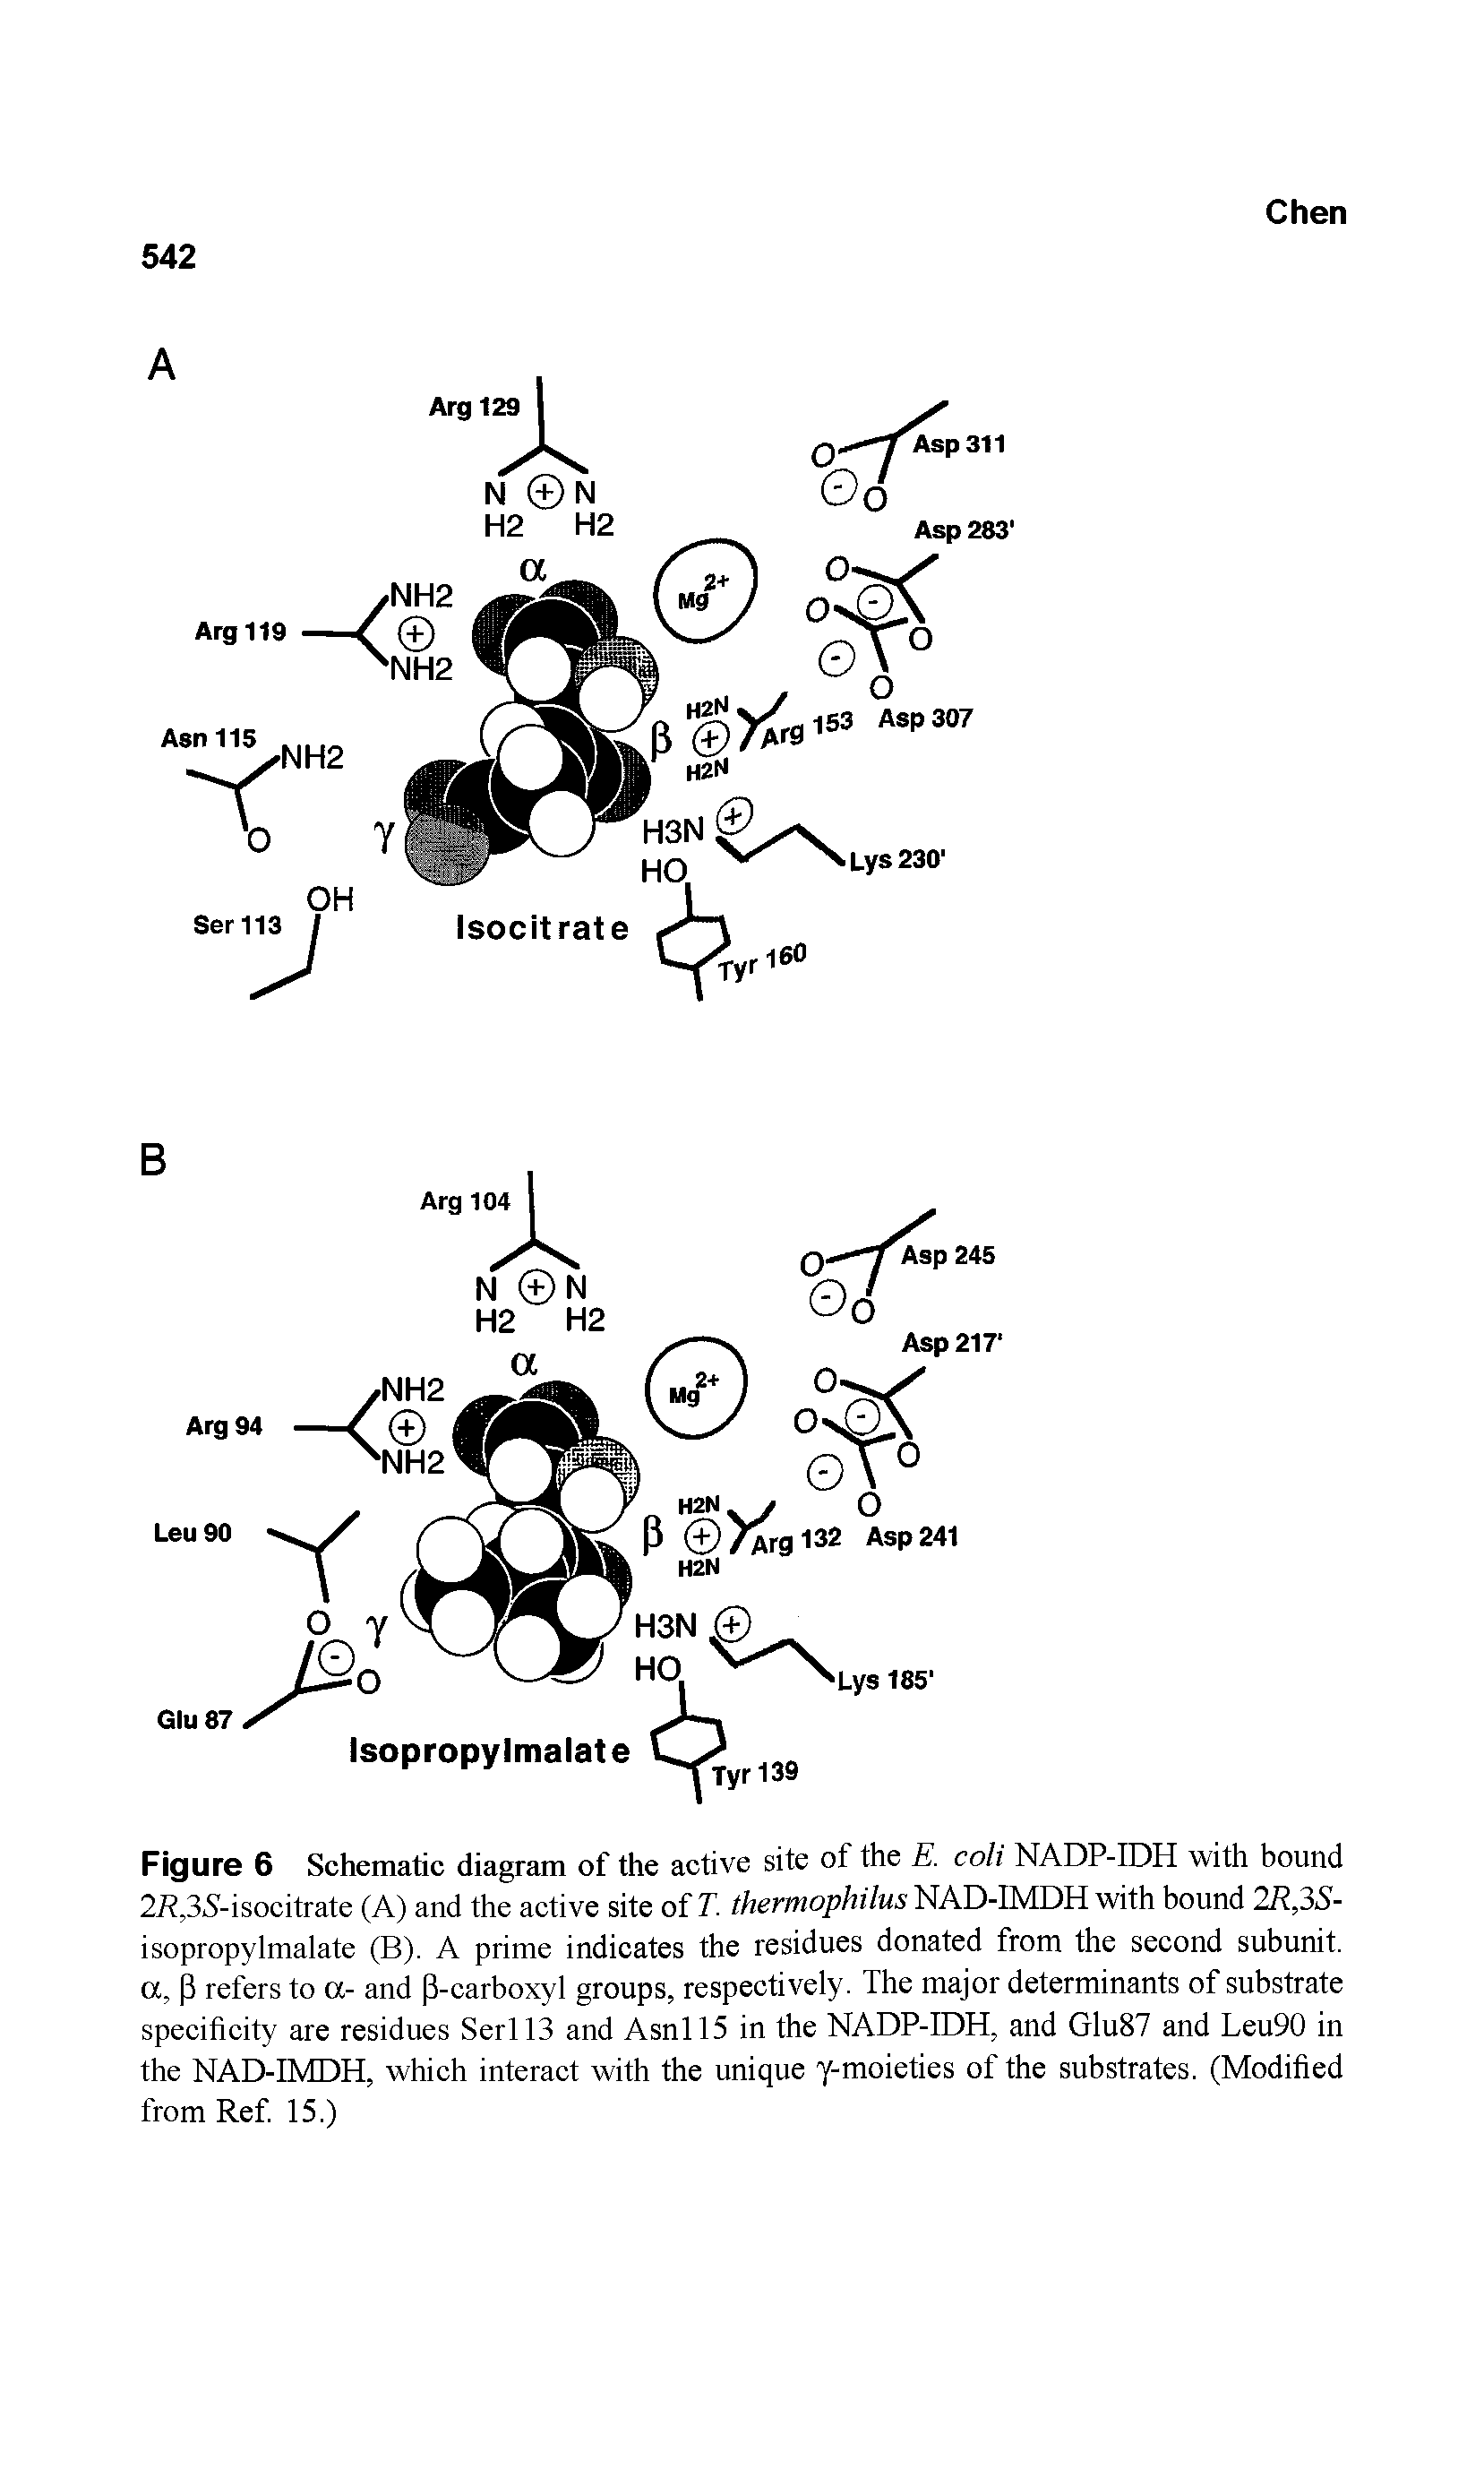 Figure 6 Schematic diagram of the active site of the E. coli NADP-IDH with bound 2A,3>S-isocitrate (A) and the active site of T. thermophilus NAD-IMDH with bound 2R,3S-isopropylmalate (B). A prime indicates the residues donated from the second subunit, a, 3 refers to a- and P-carboxyl groups, respectively. The major determinants of substrate specificity are residues Seri 13 and Asnll5 in the NADP-IDH, and Glu87 and Leu90 in the NAD-IMDH, which interact with the unique y-moieties of the substrates. (Modified from Ref. 15.)...